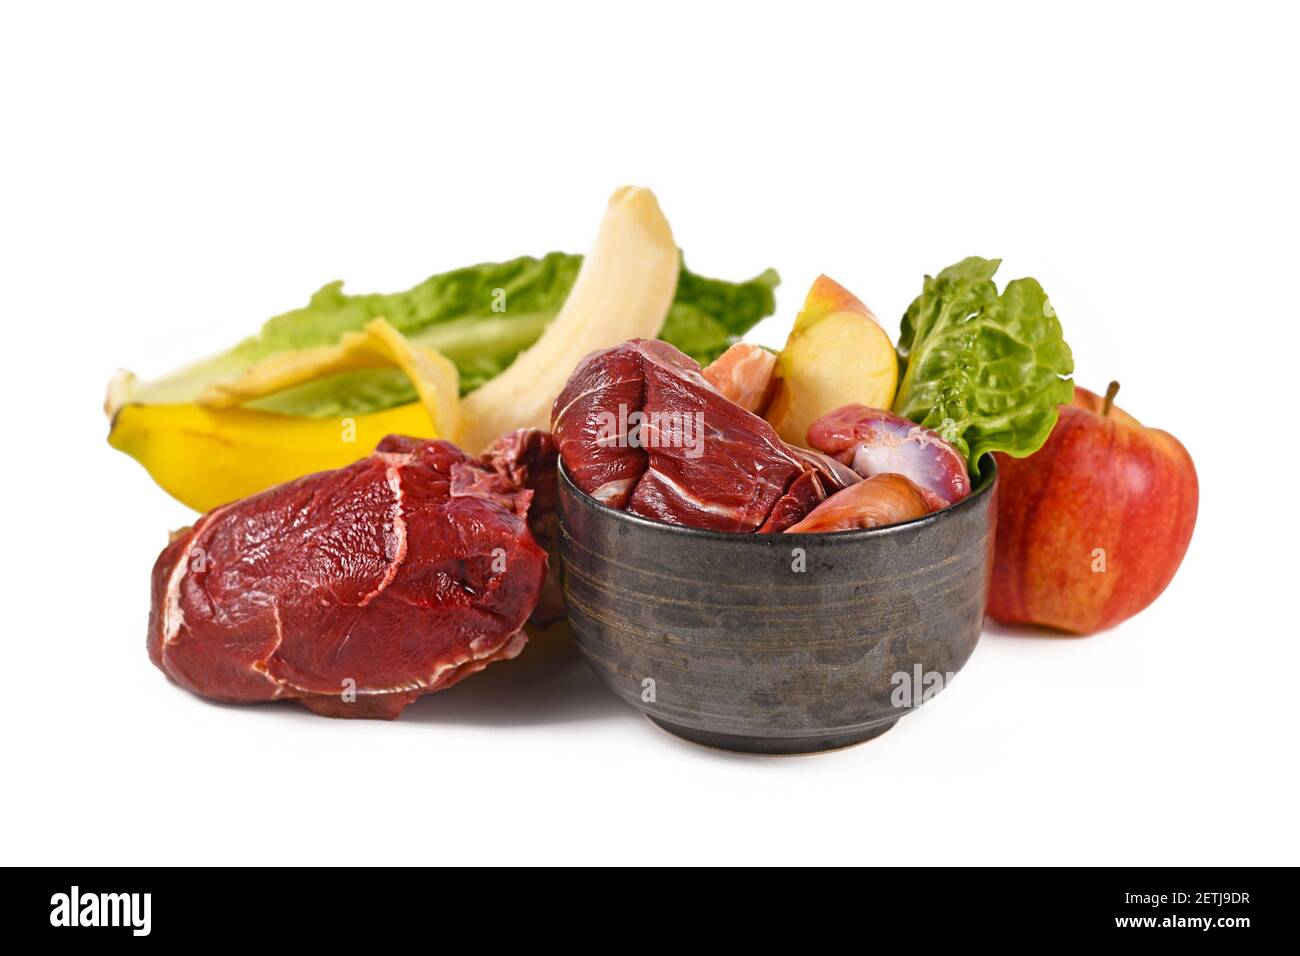 Dog bowl filled with biologically appropriate raw food containing meat chunks, fruits and vegetables surrounded by ingredients on white background Stock Photo